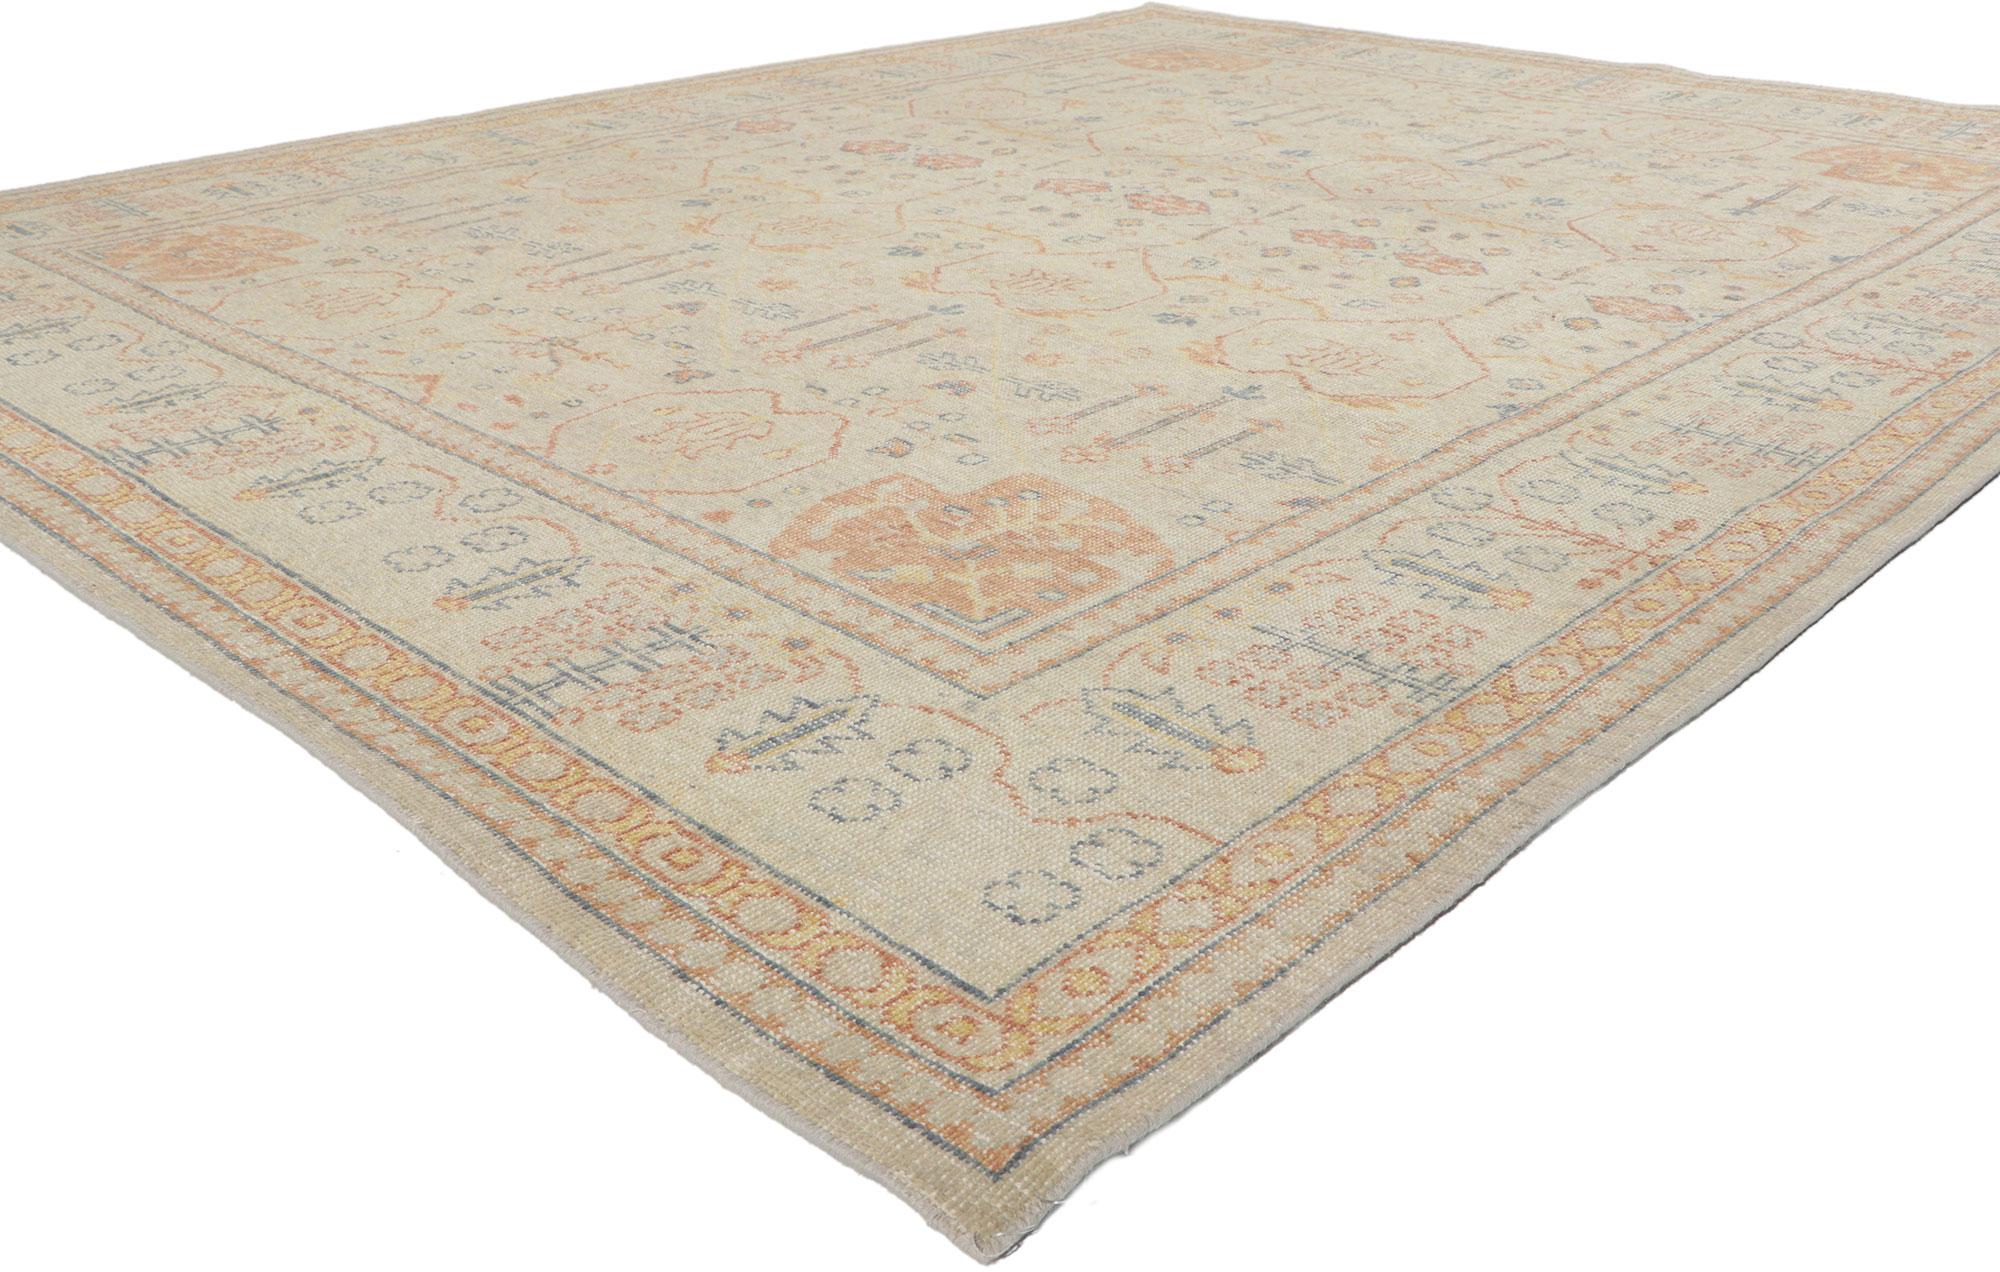 30782 New Modern Distressed Rug with Vintage Style 08'00 x 09'11. With its Indian summer colors and weathered beauty combined with nostalgic charm, this new contemporary distressed rug creates an inimitable warmth and calming ambiance. The botanical